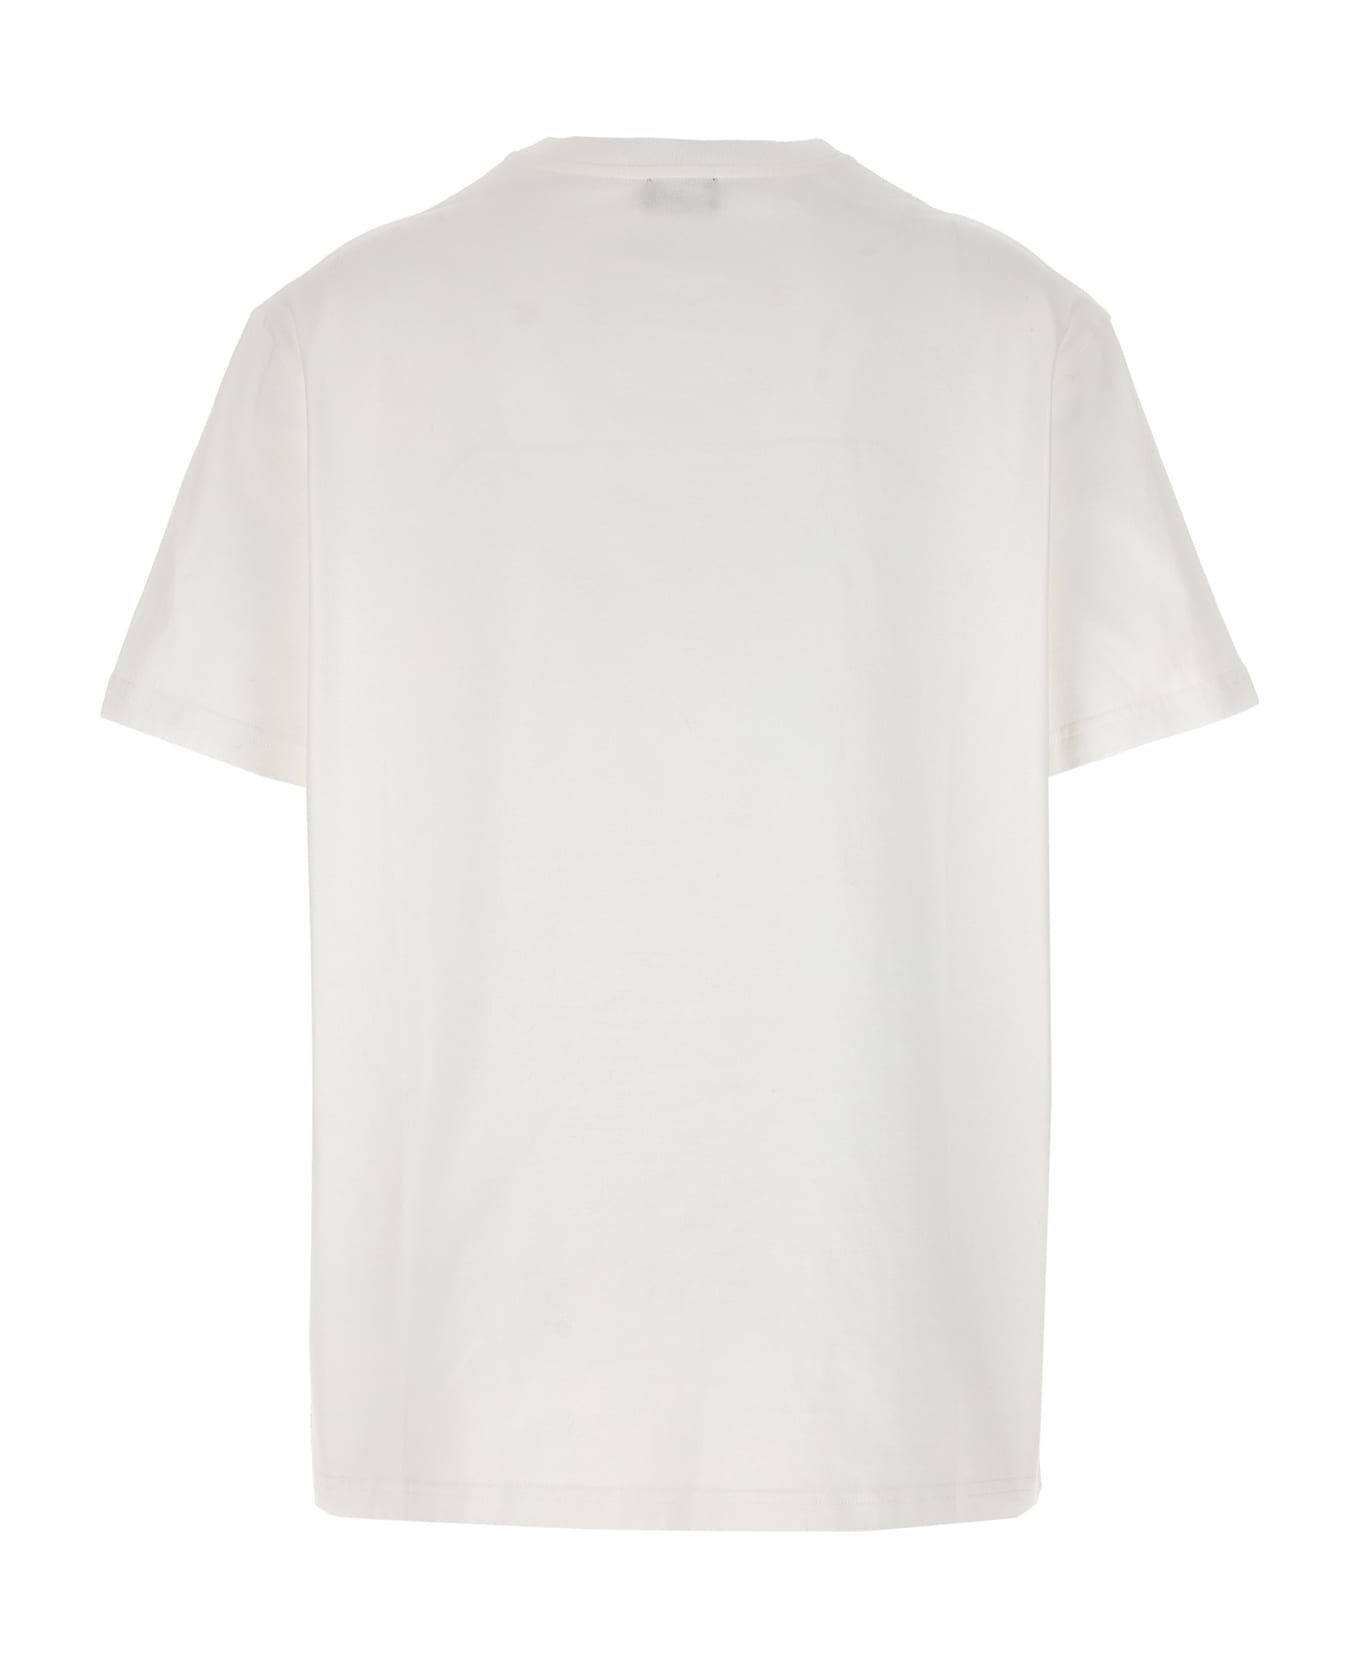 Etro Embroidery T-shirt - White Tシャツ